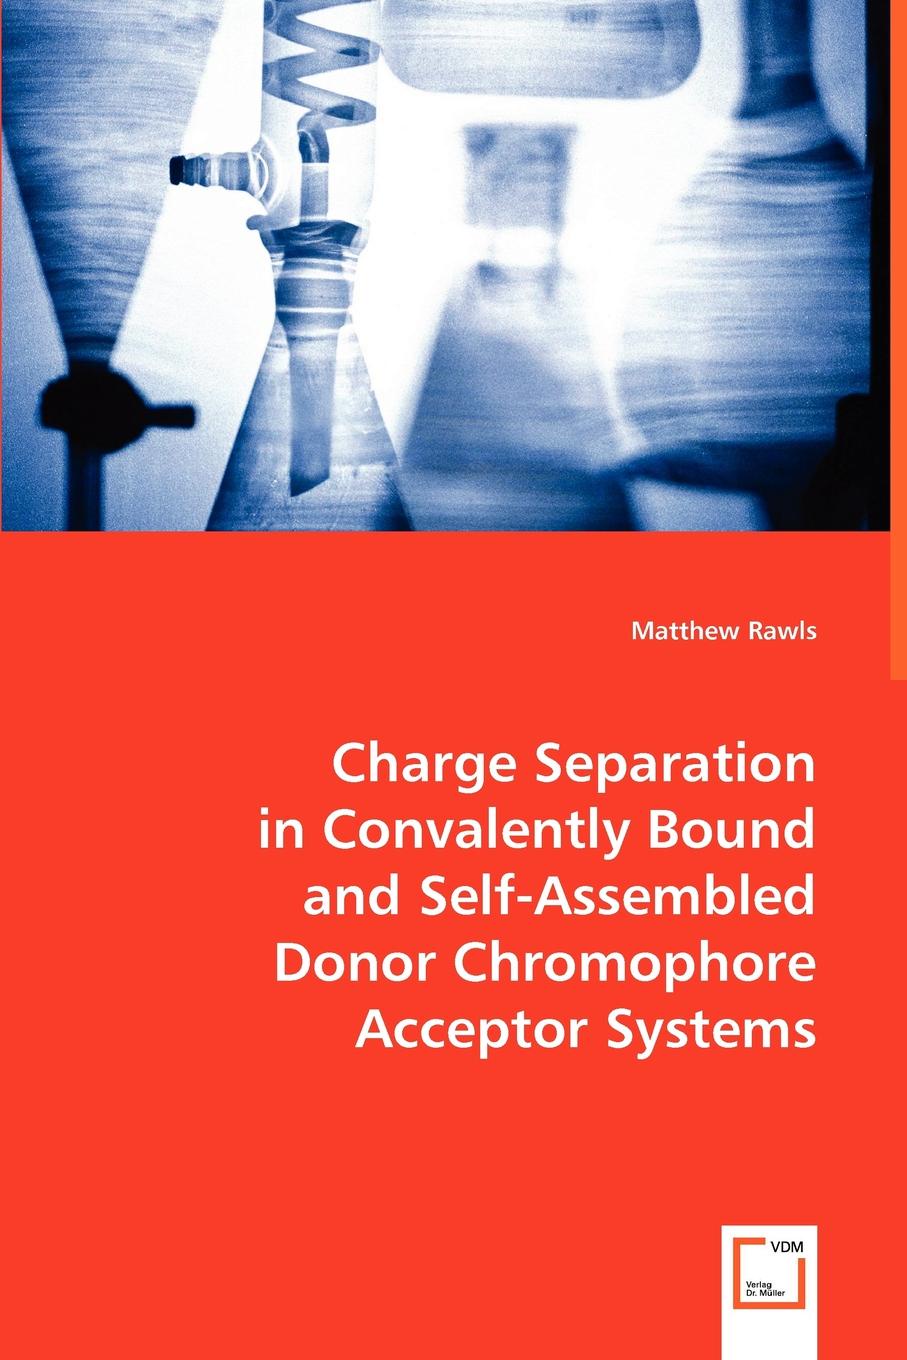 Charge Separation in Convalently Bound and Self-Assembled Donor Chromophore Acceptor Systems